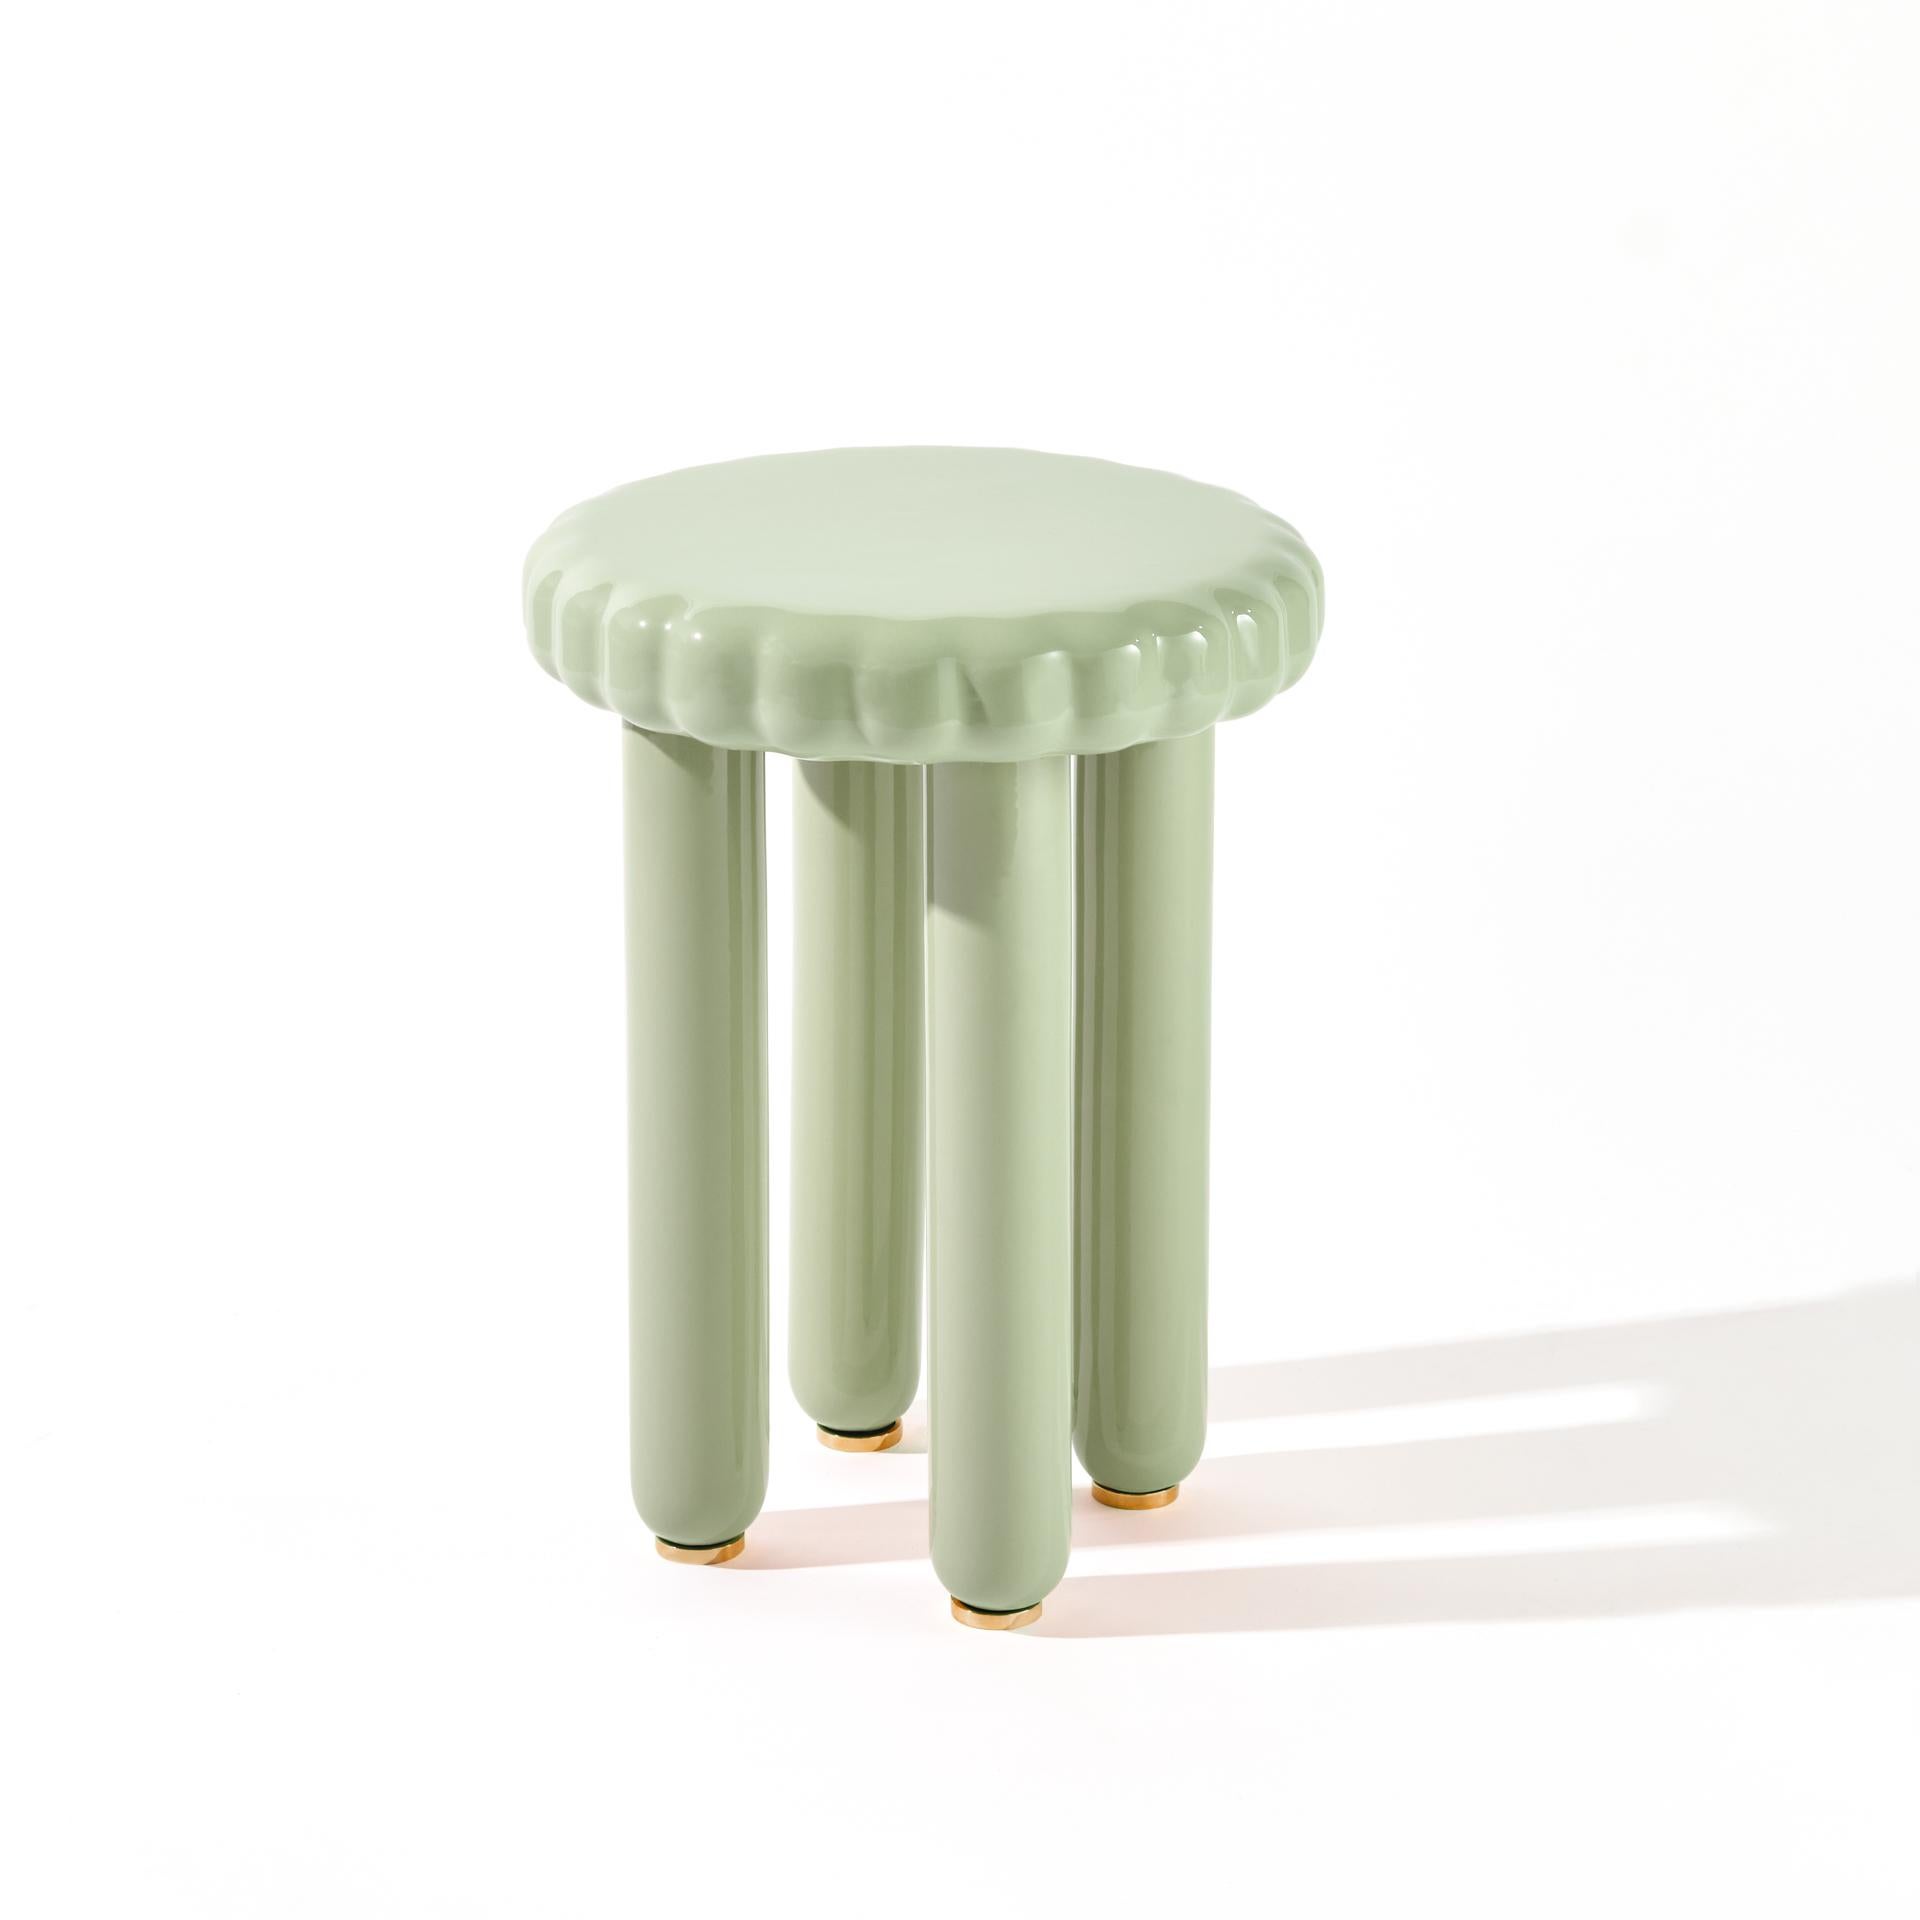 Introducing the ‘Biscotto’ ceramic stool/side table designed by Studio Yellowdot - inspired by the delectable essence of biscuits. This piece seamlessly combines the inviting softness of biscuit-inspired edges with a burst of bold, delicious glazed